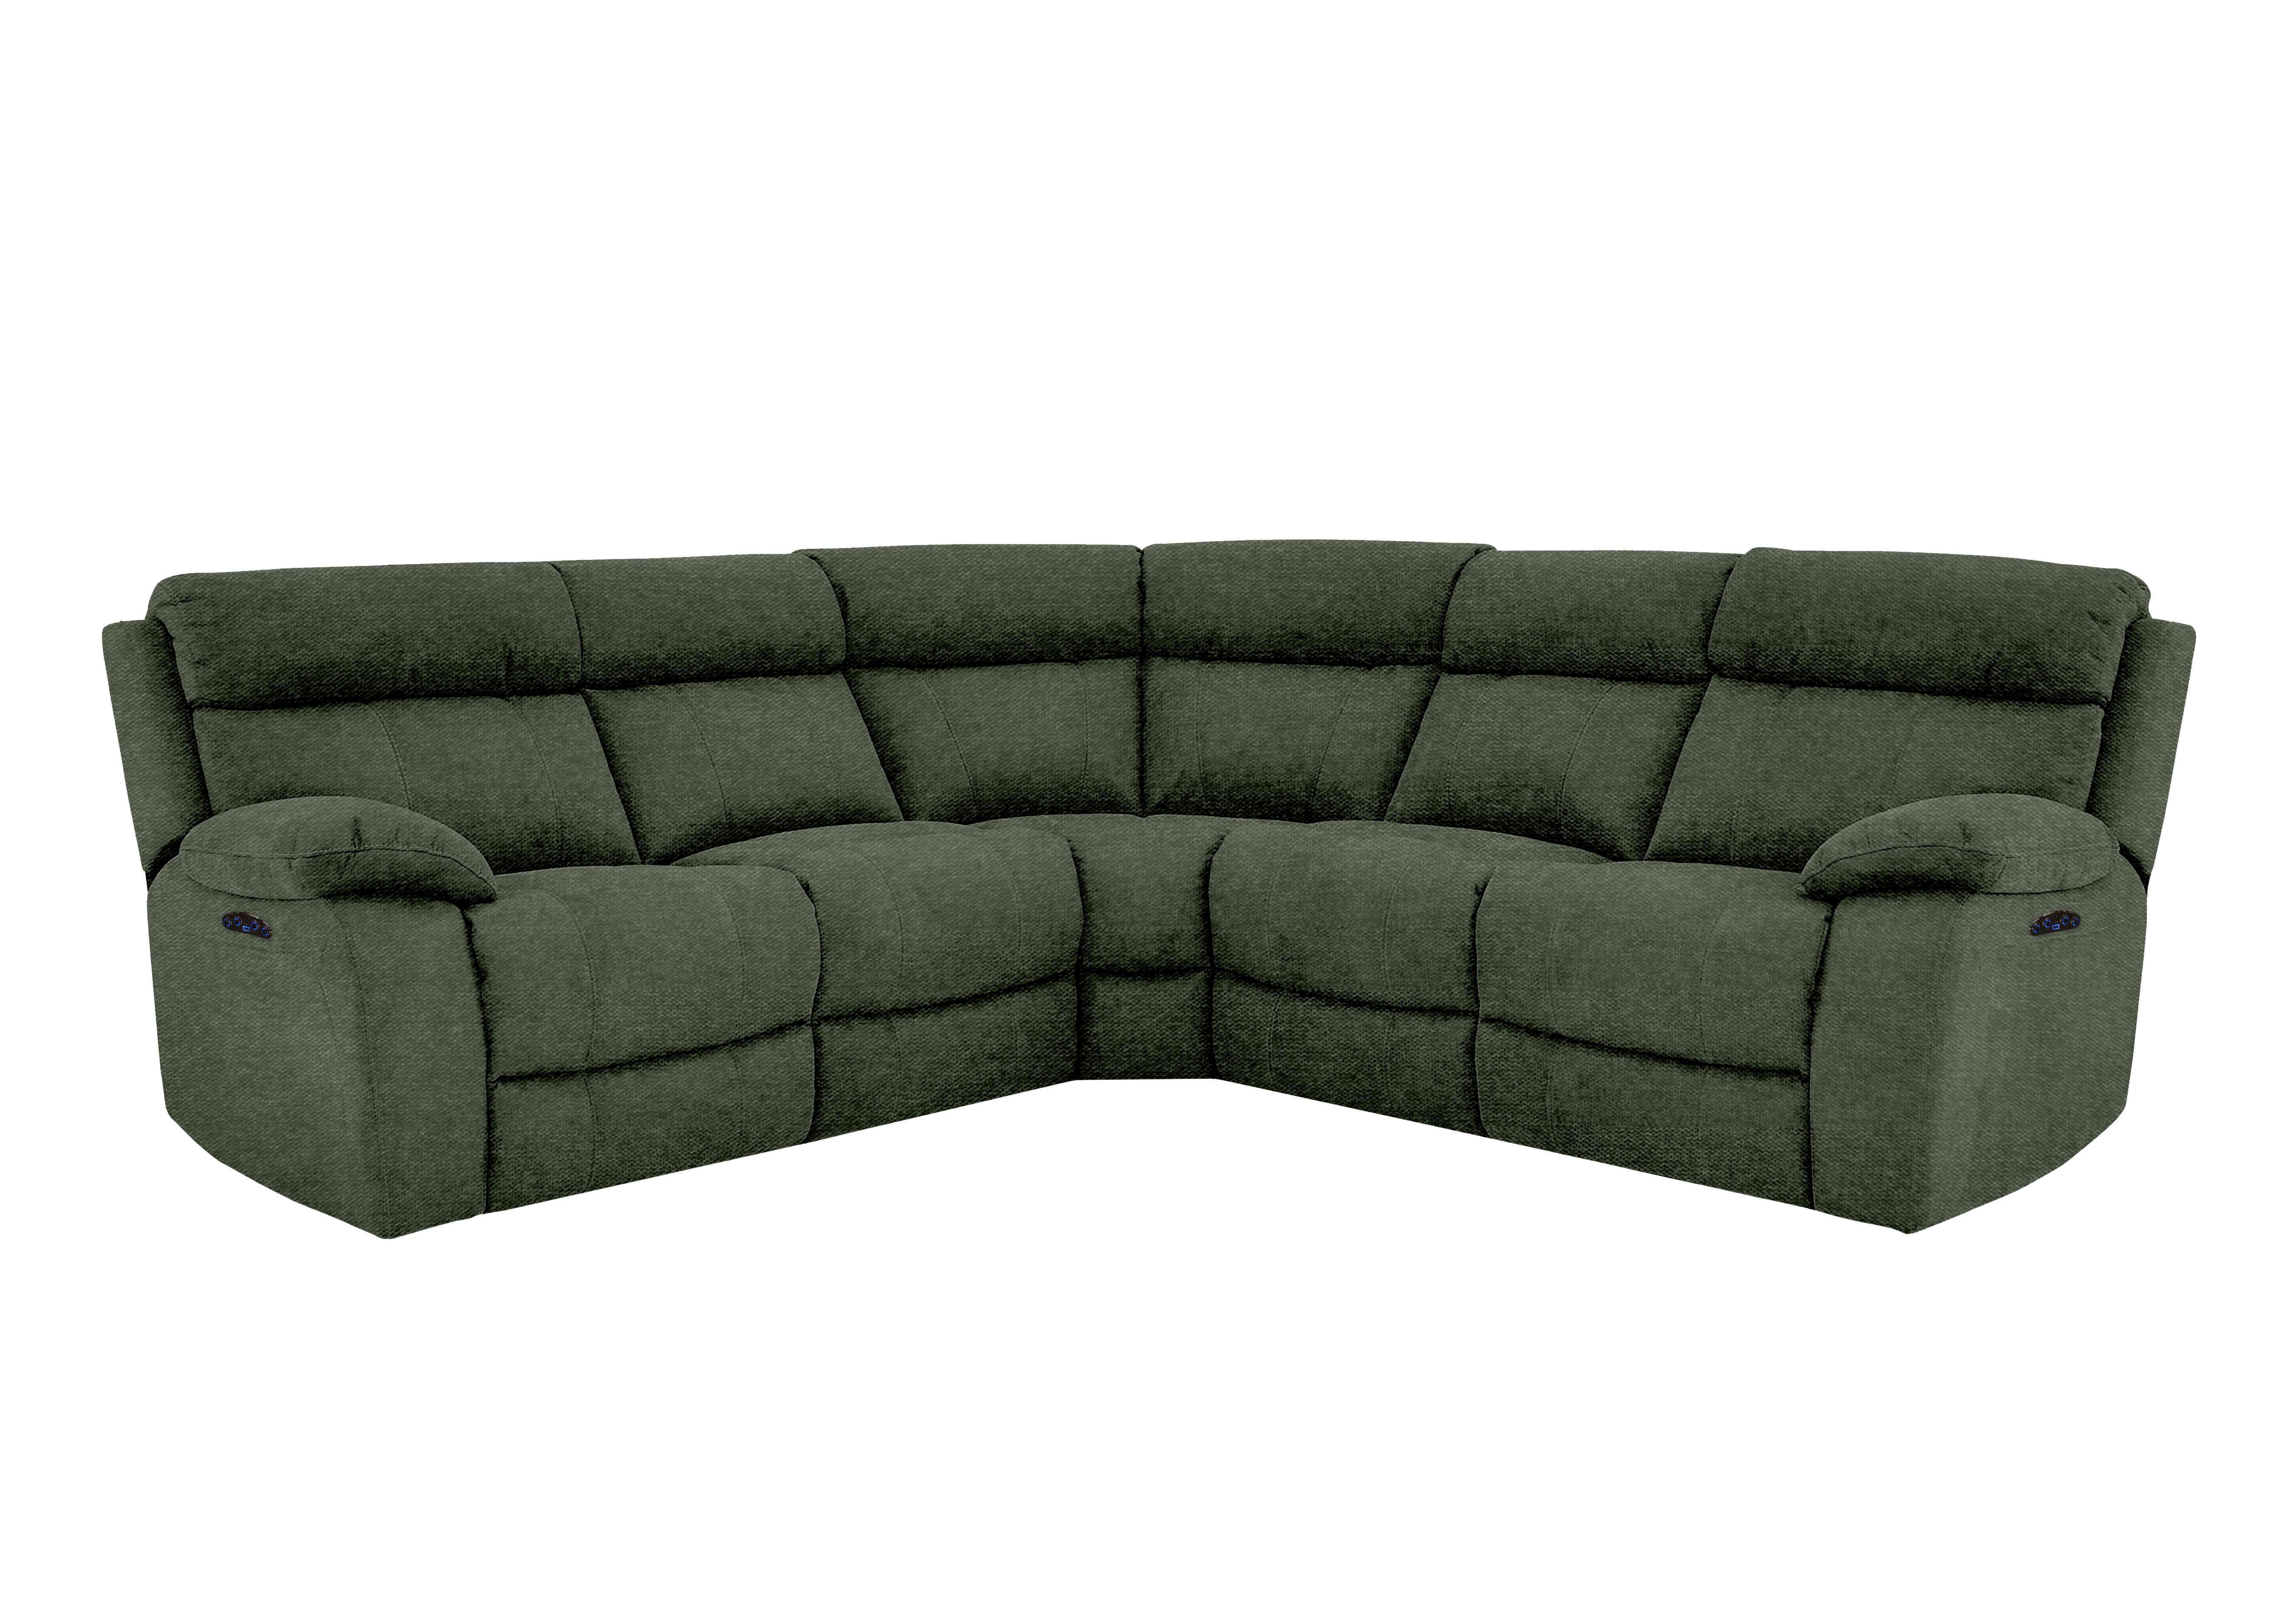 Moreno Fabric Power Recliner Corner Sofa with Power Headrests in Fab-Ska-R48 Moss Green on Furniture Village